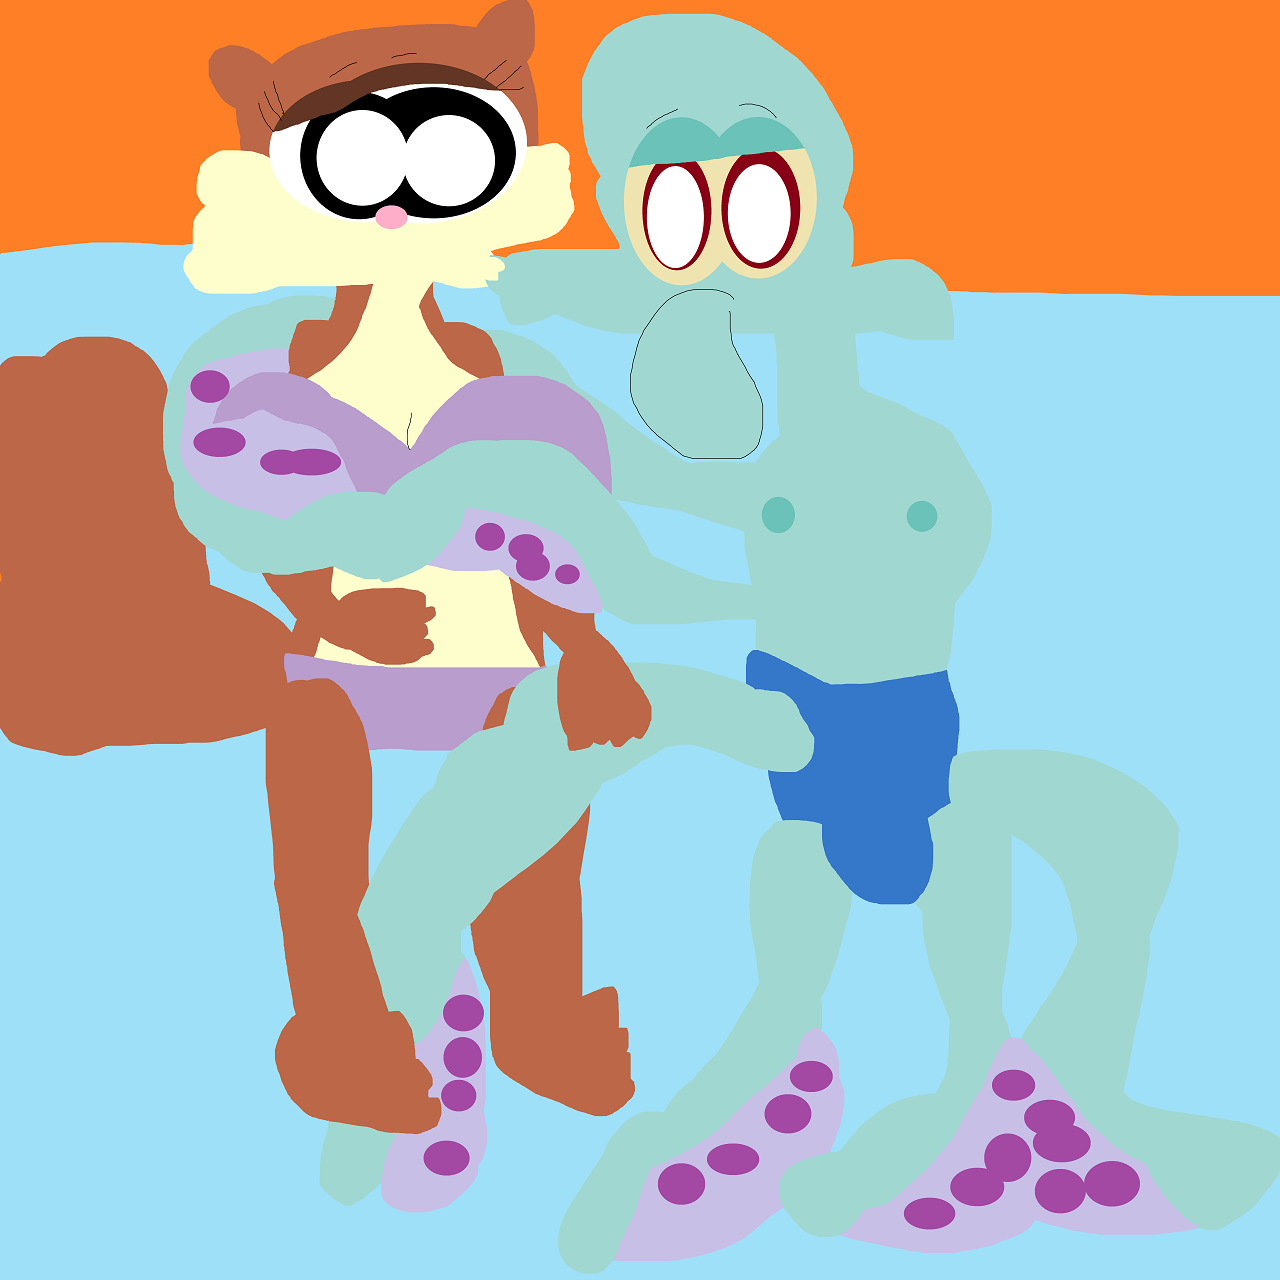 Squidward And Sandy Having Some Fun In Water Again by Falconlobo